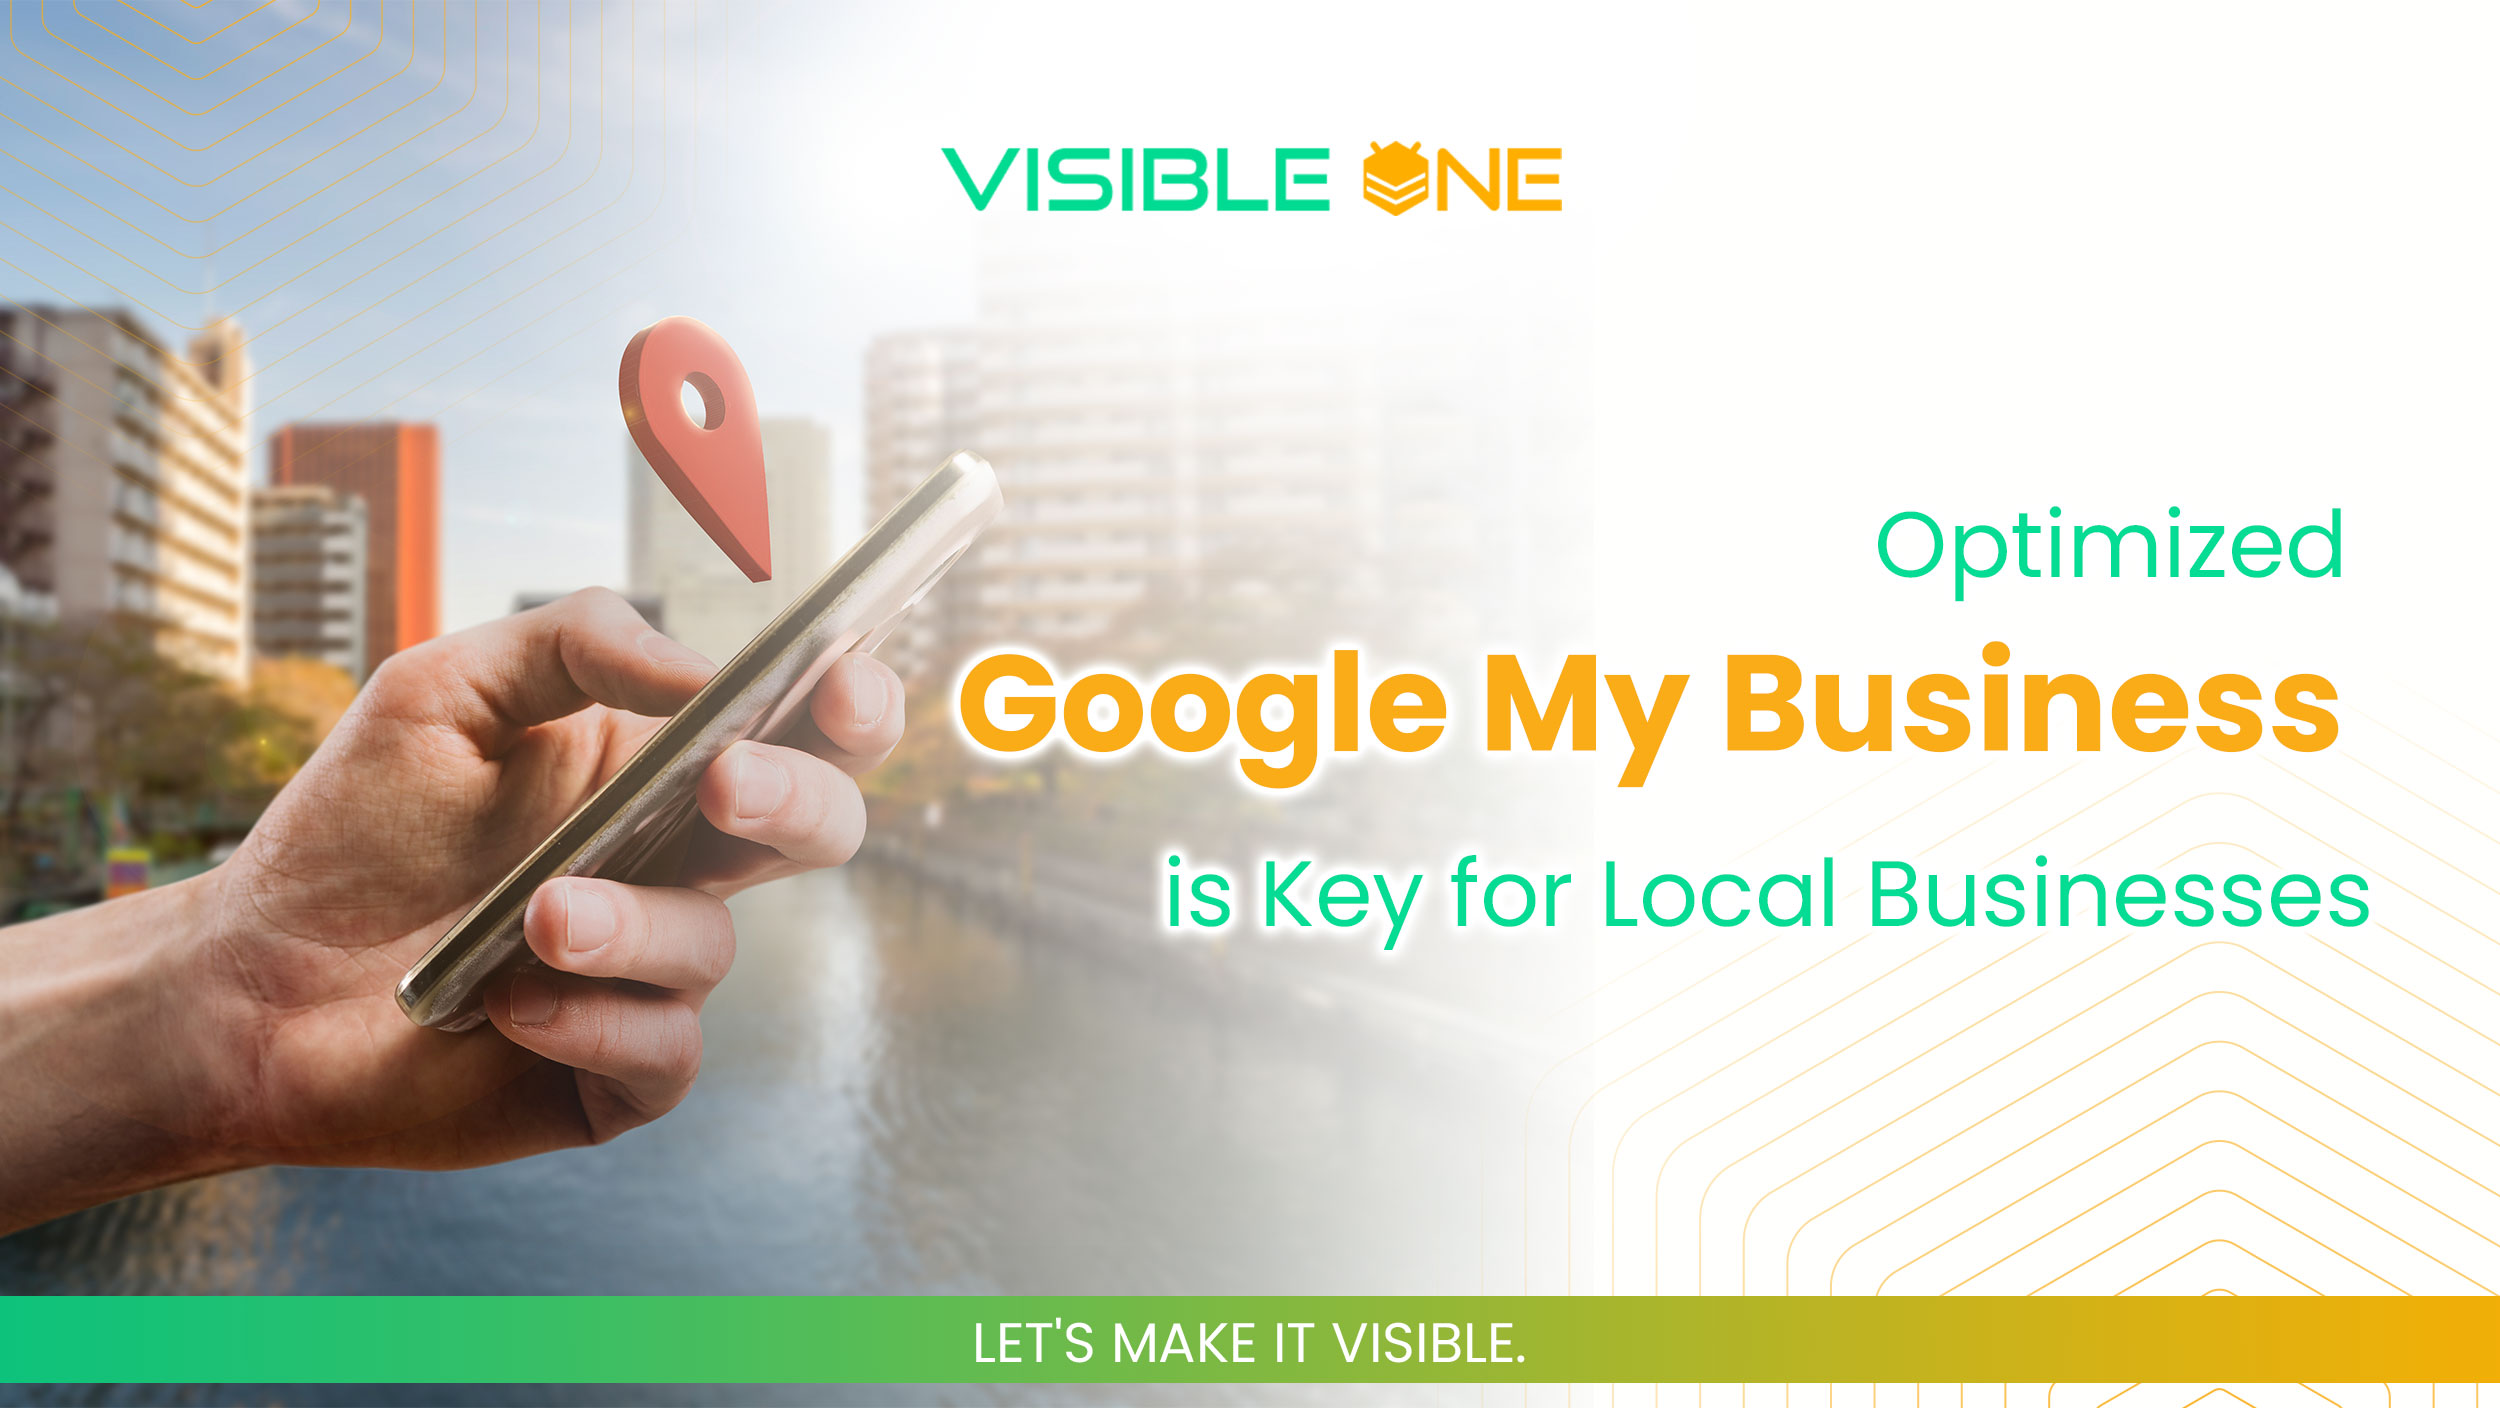 Optimized Google My Business is Key for Local Businesses